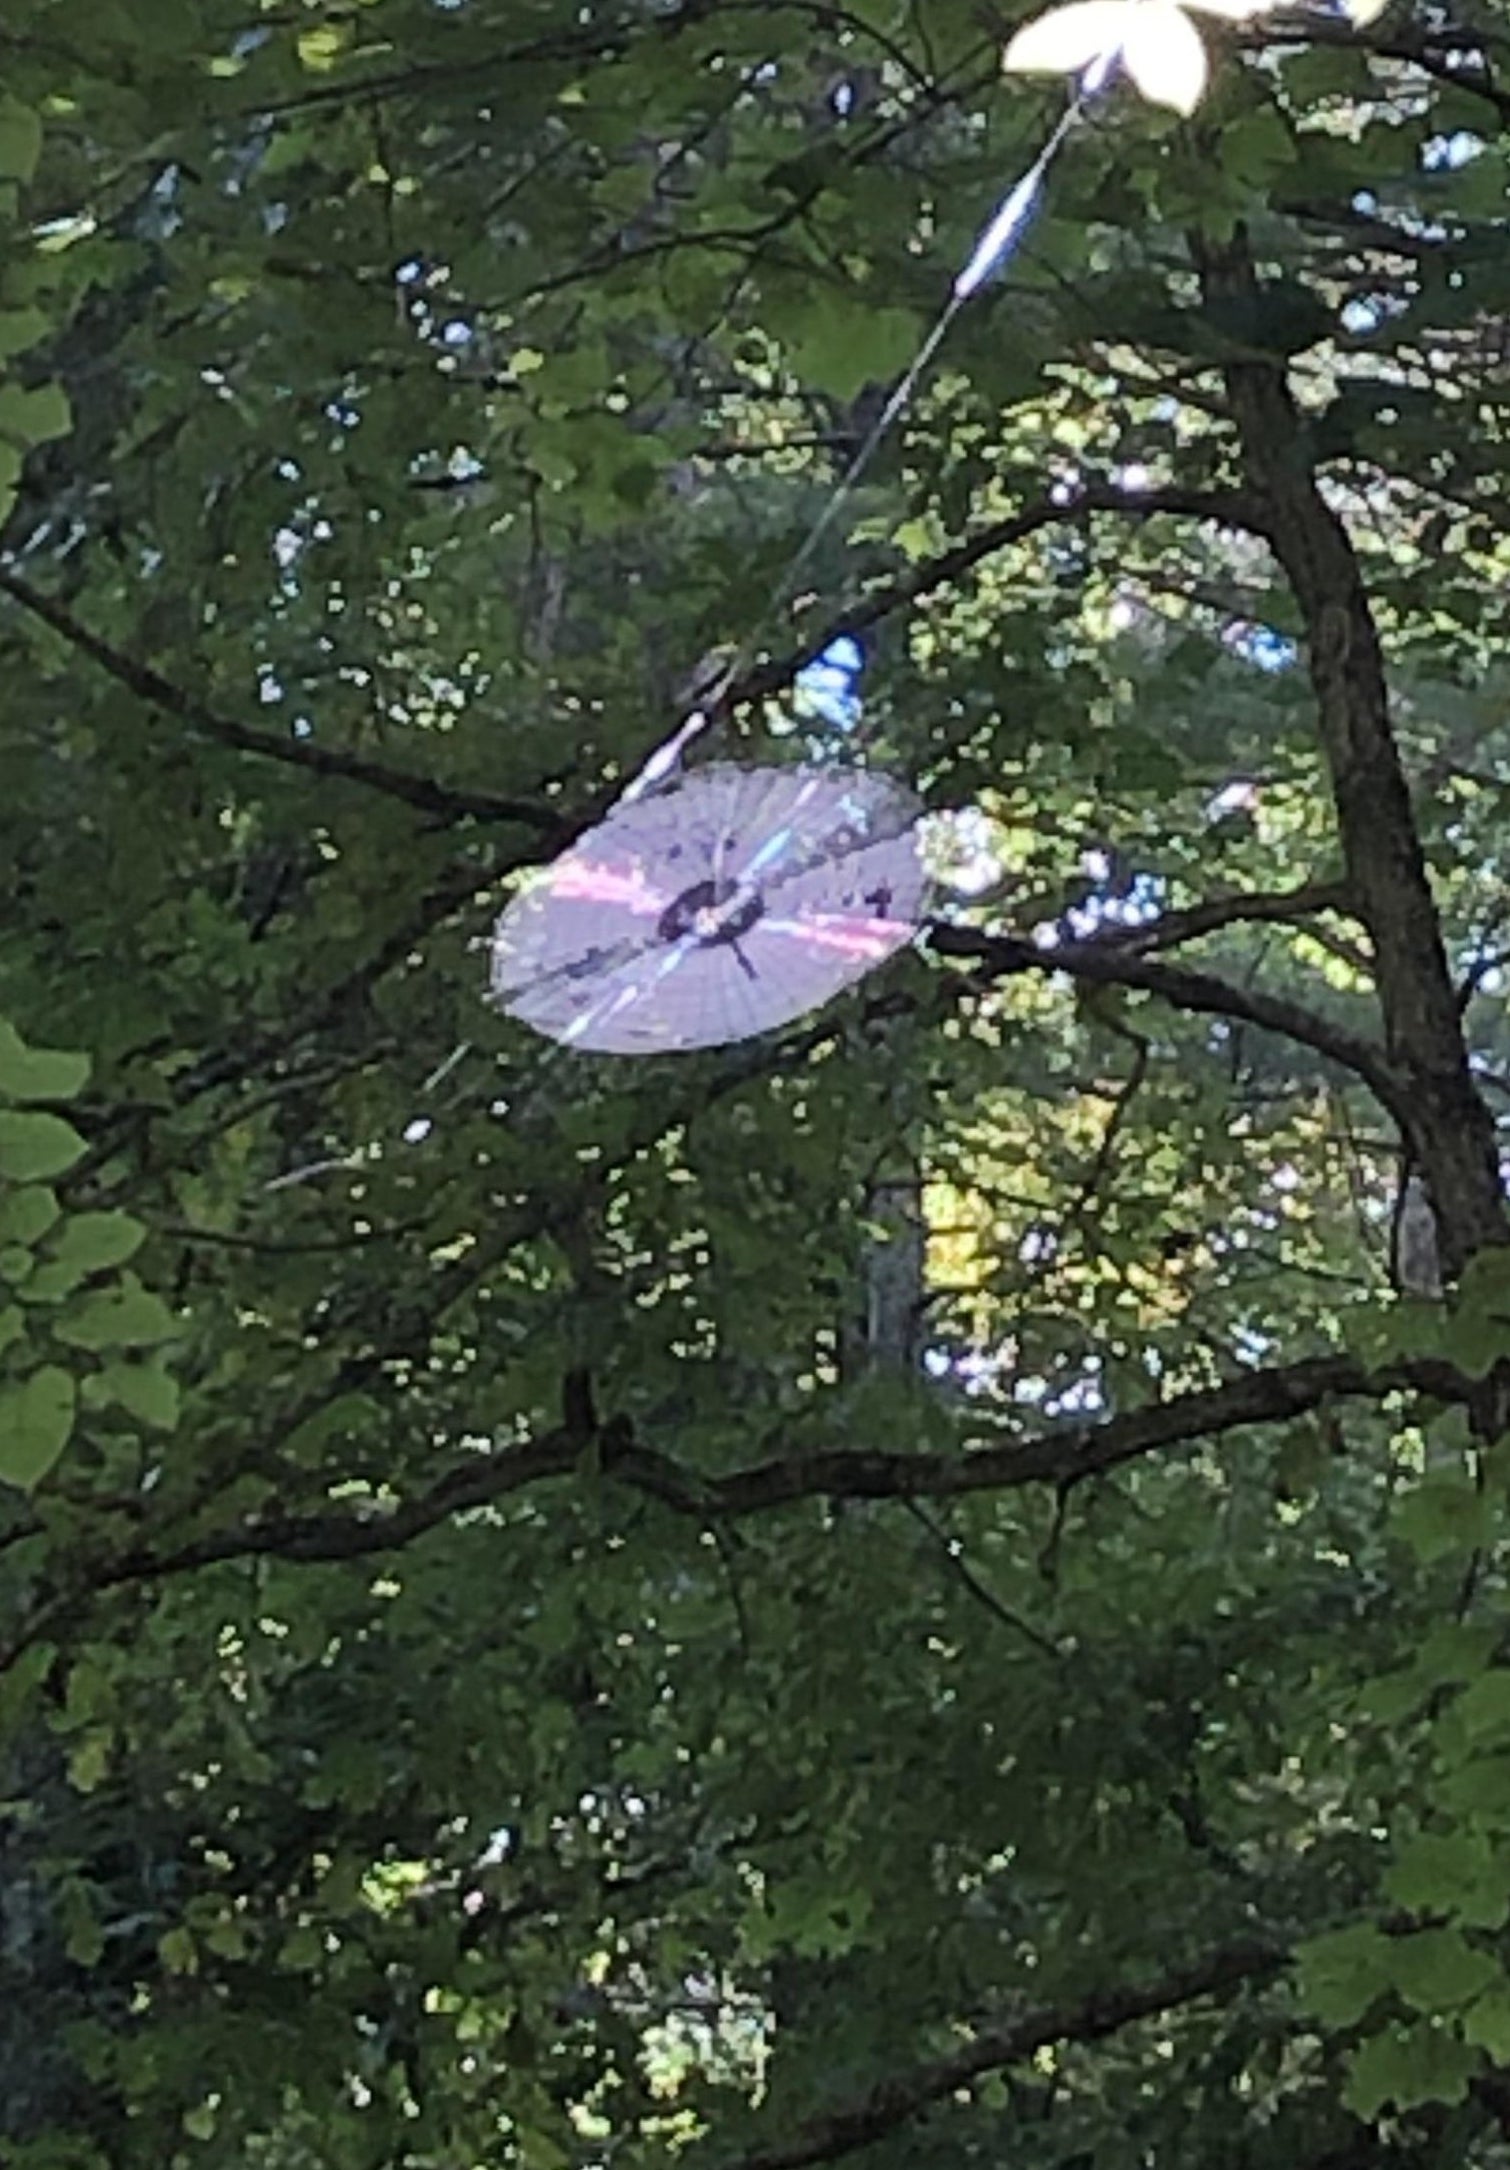 a spider web in the trees that is shaped like a disc